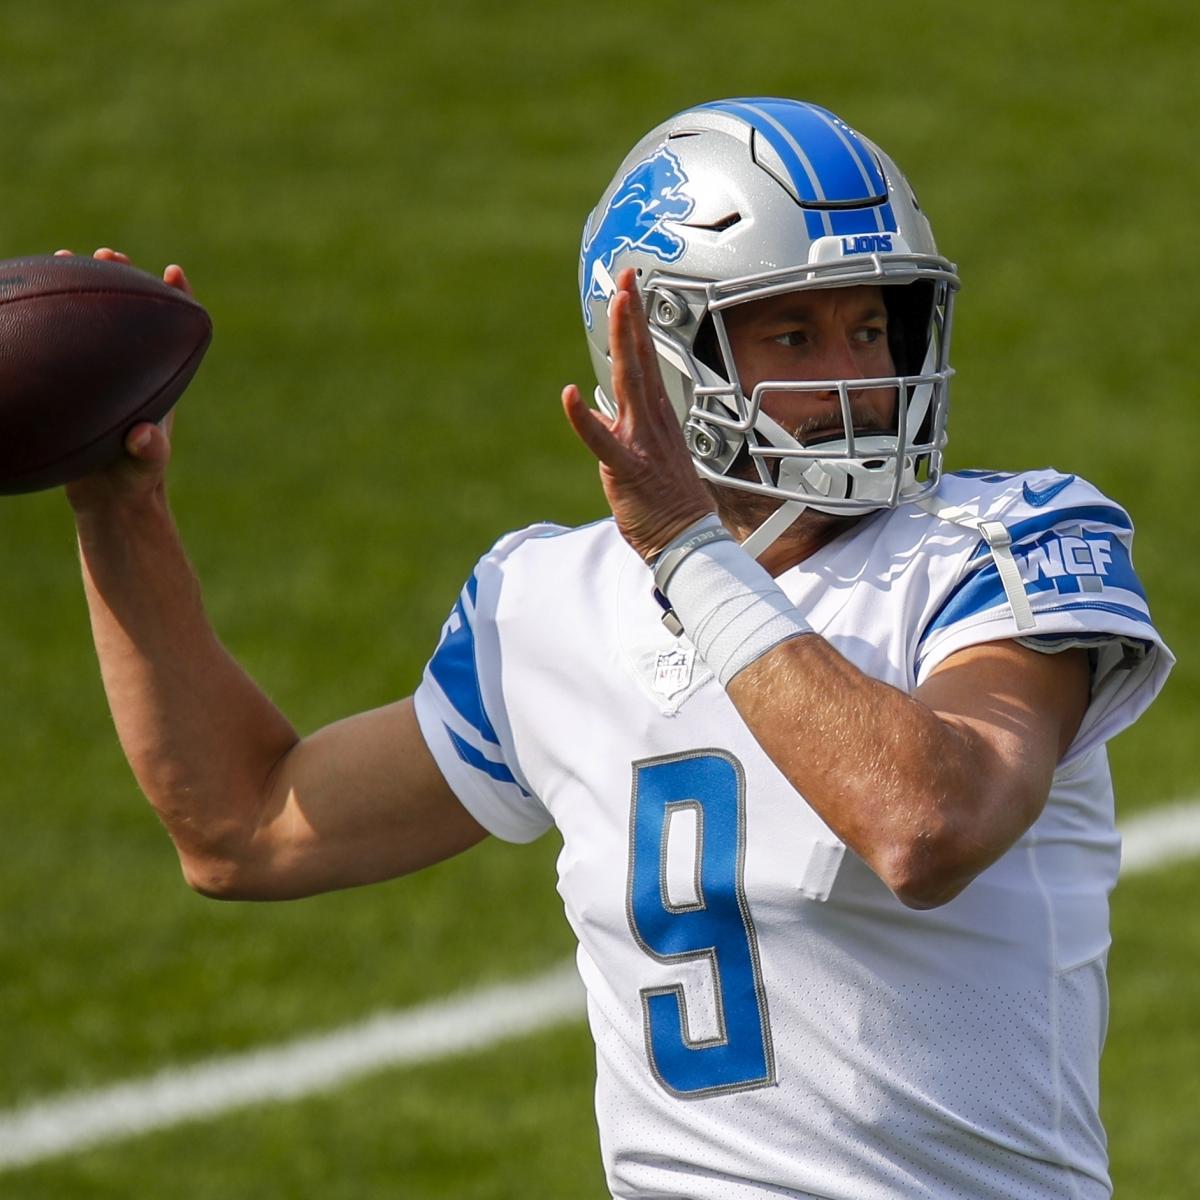 Matthew Stafford’s Spot TBD After Rib Wretchedness vs. Packers, Per Lions’ Bevell